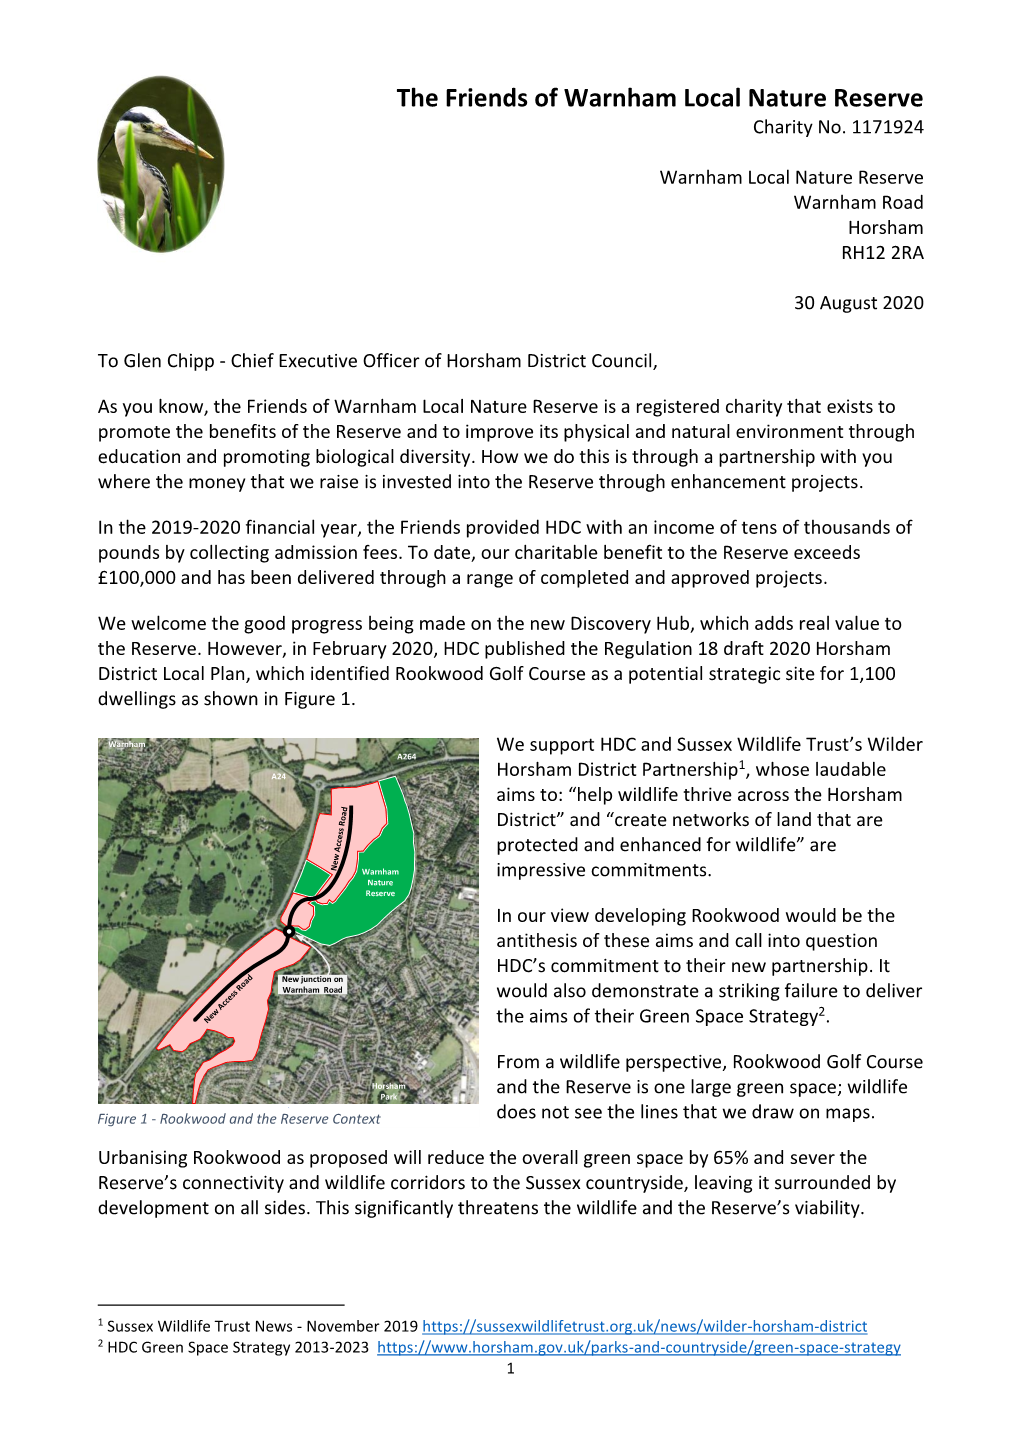 The Friends of Warnham Local Nature Reserve Charity No